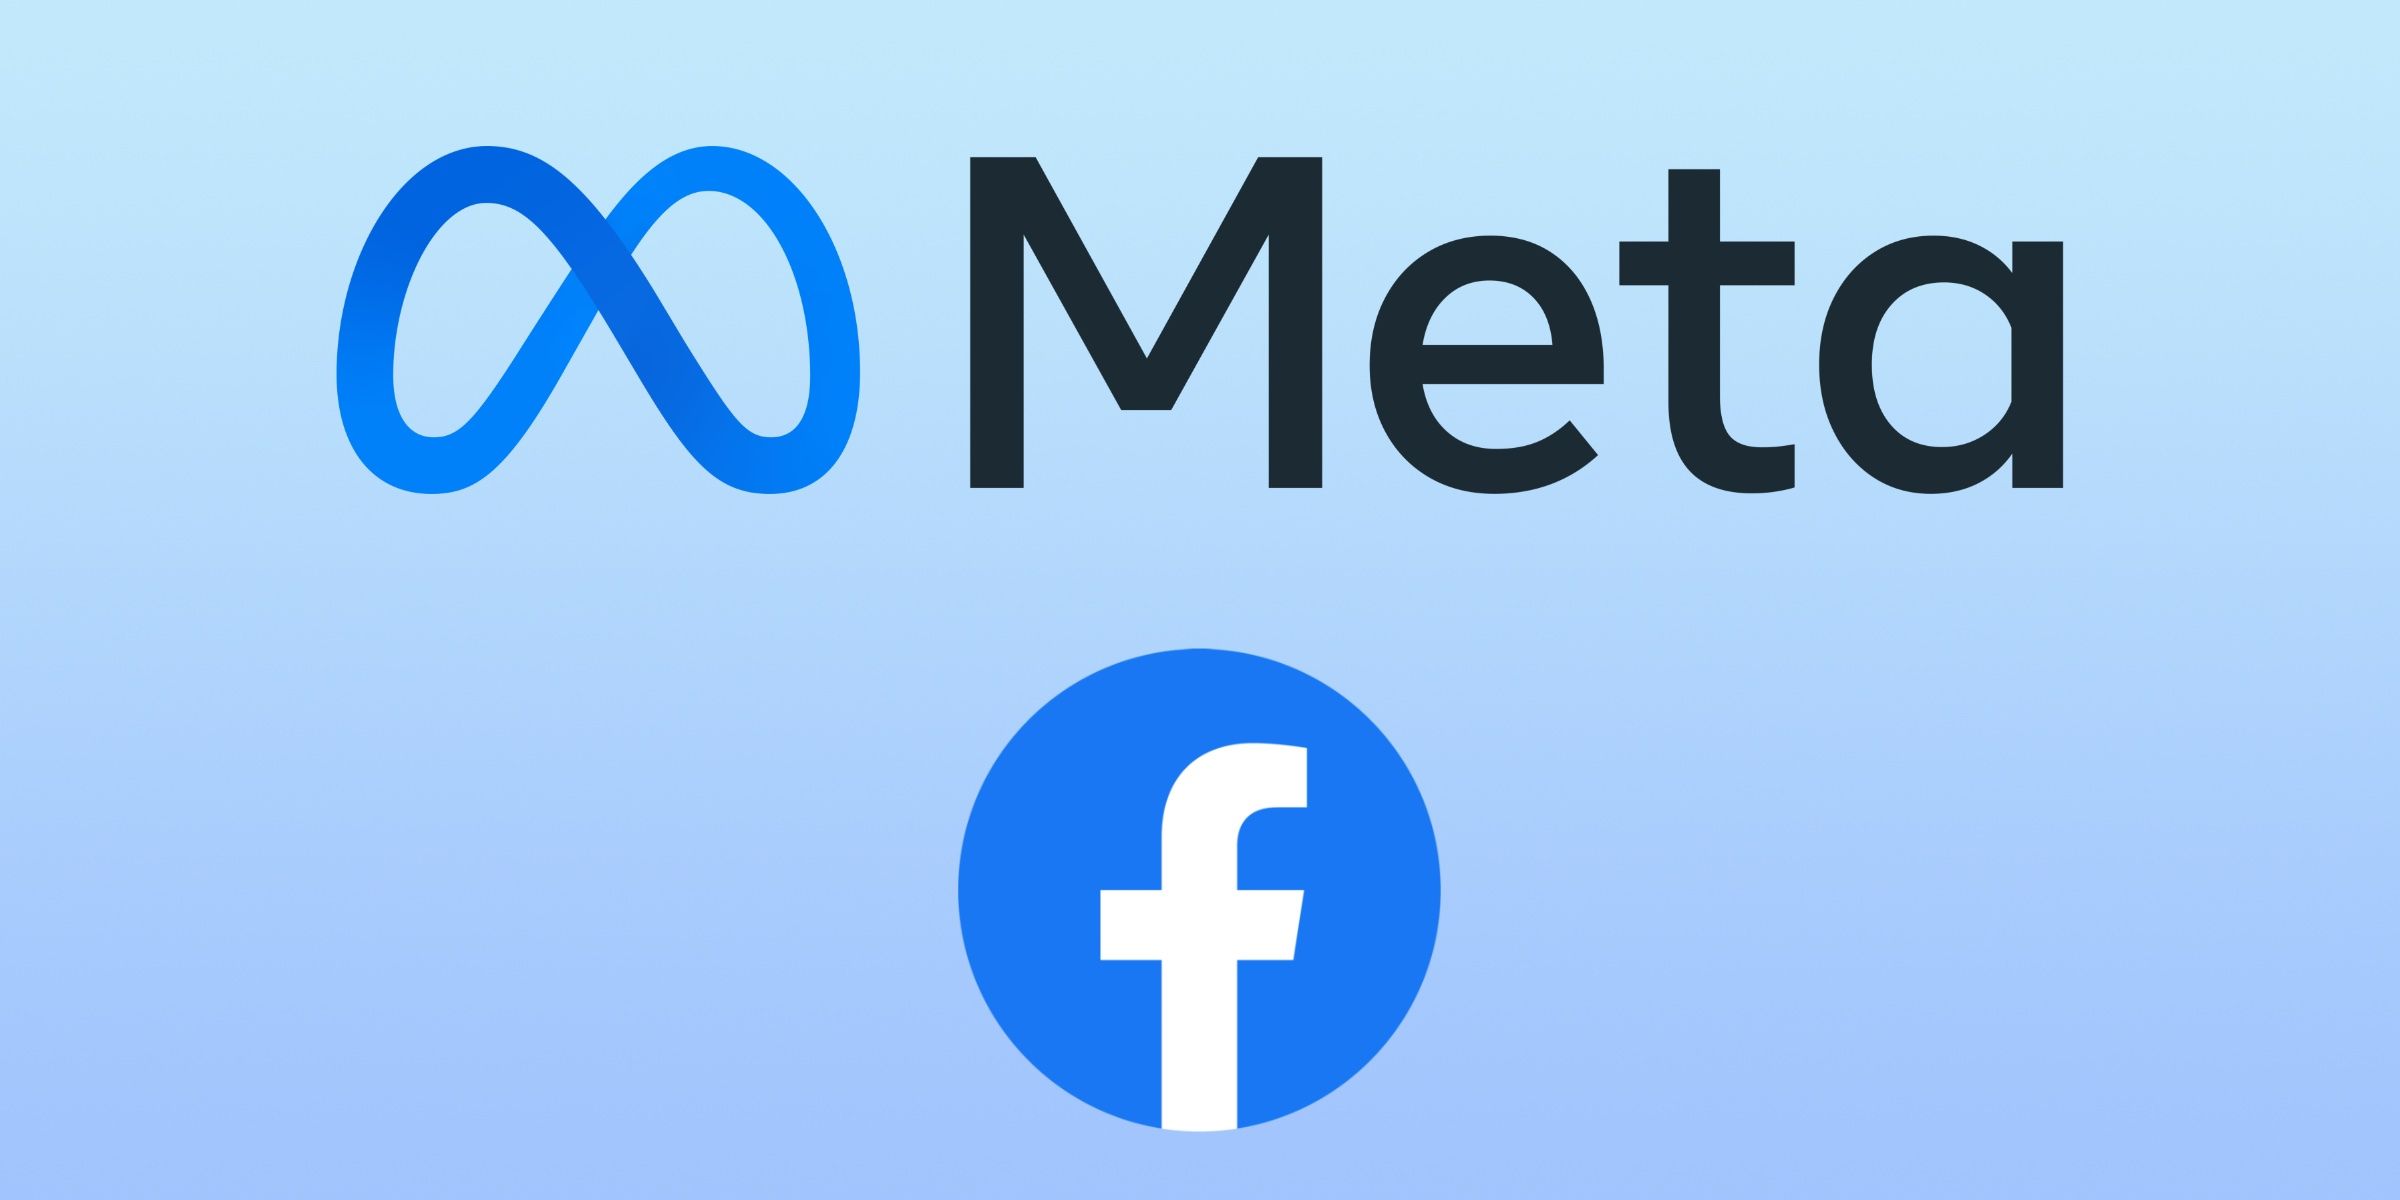 The Facebook and Meta Logos against a pale blue gradient background.